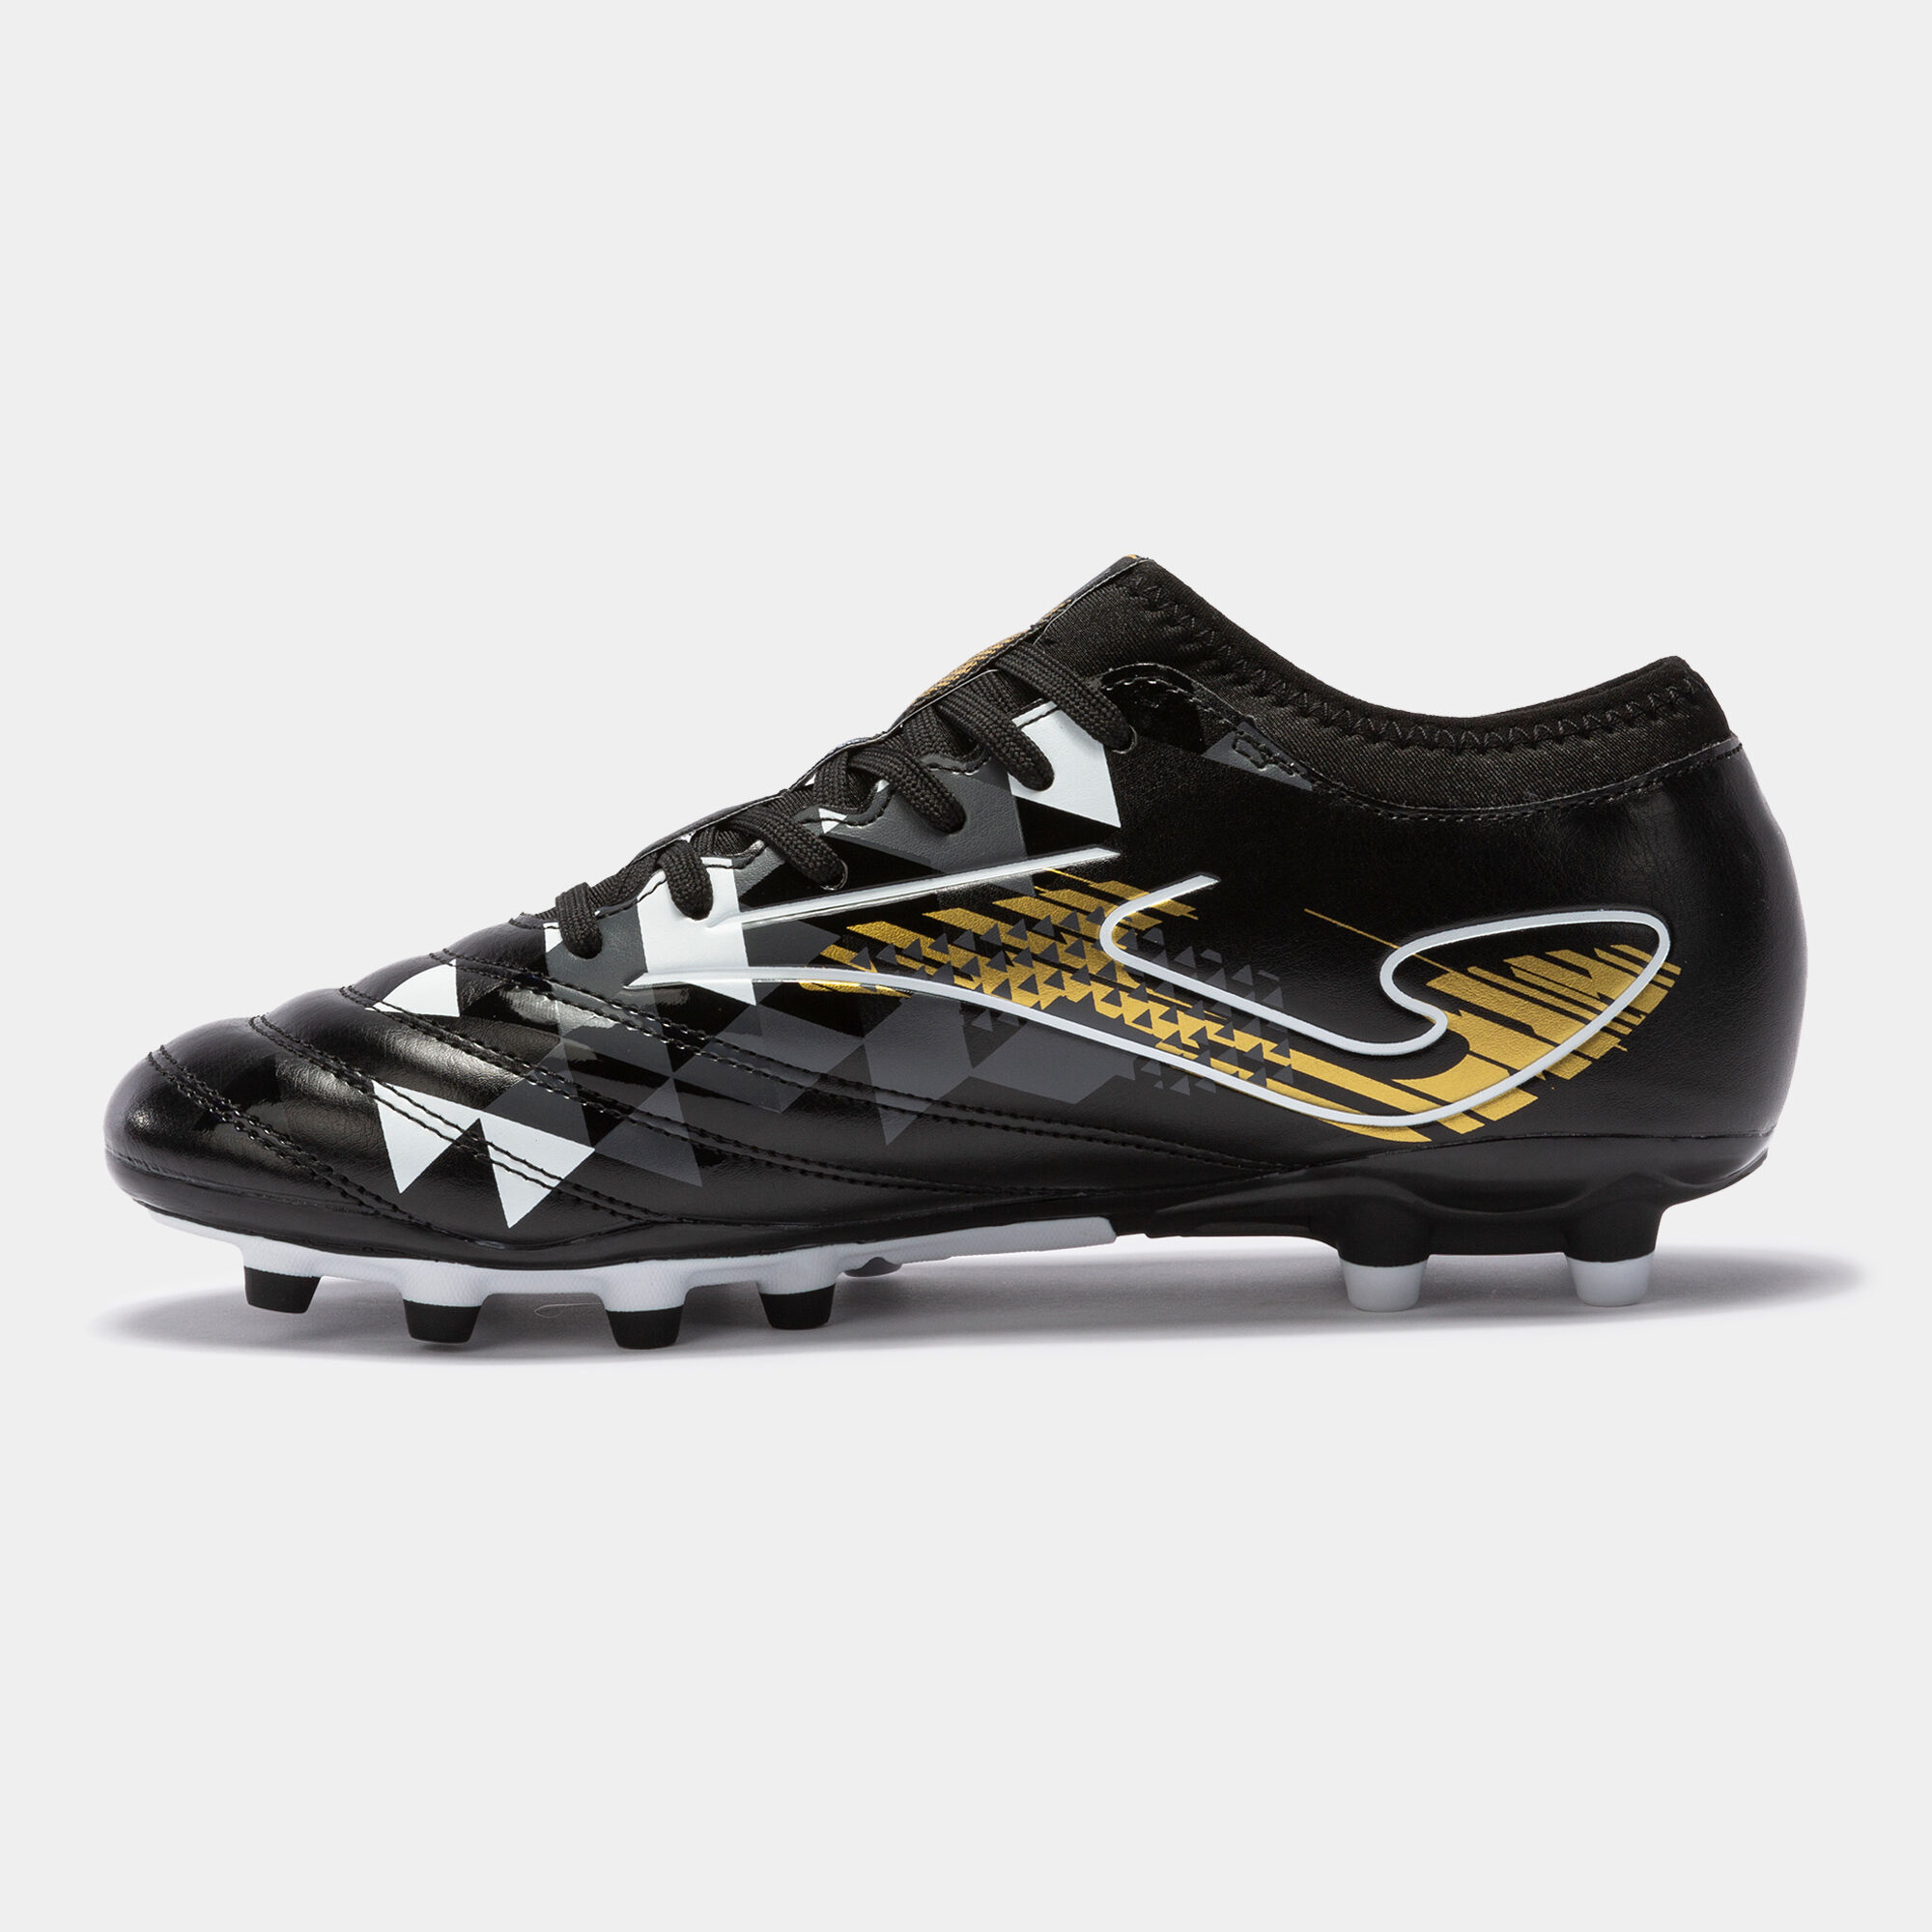 FOOTBALL BOOTS PROPULSION 22 FIRM GROUND FG BLACK